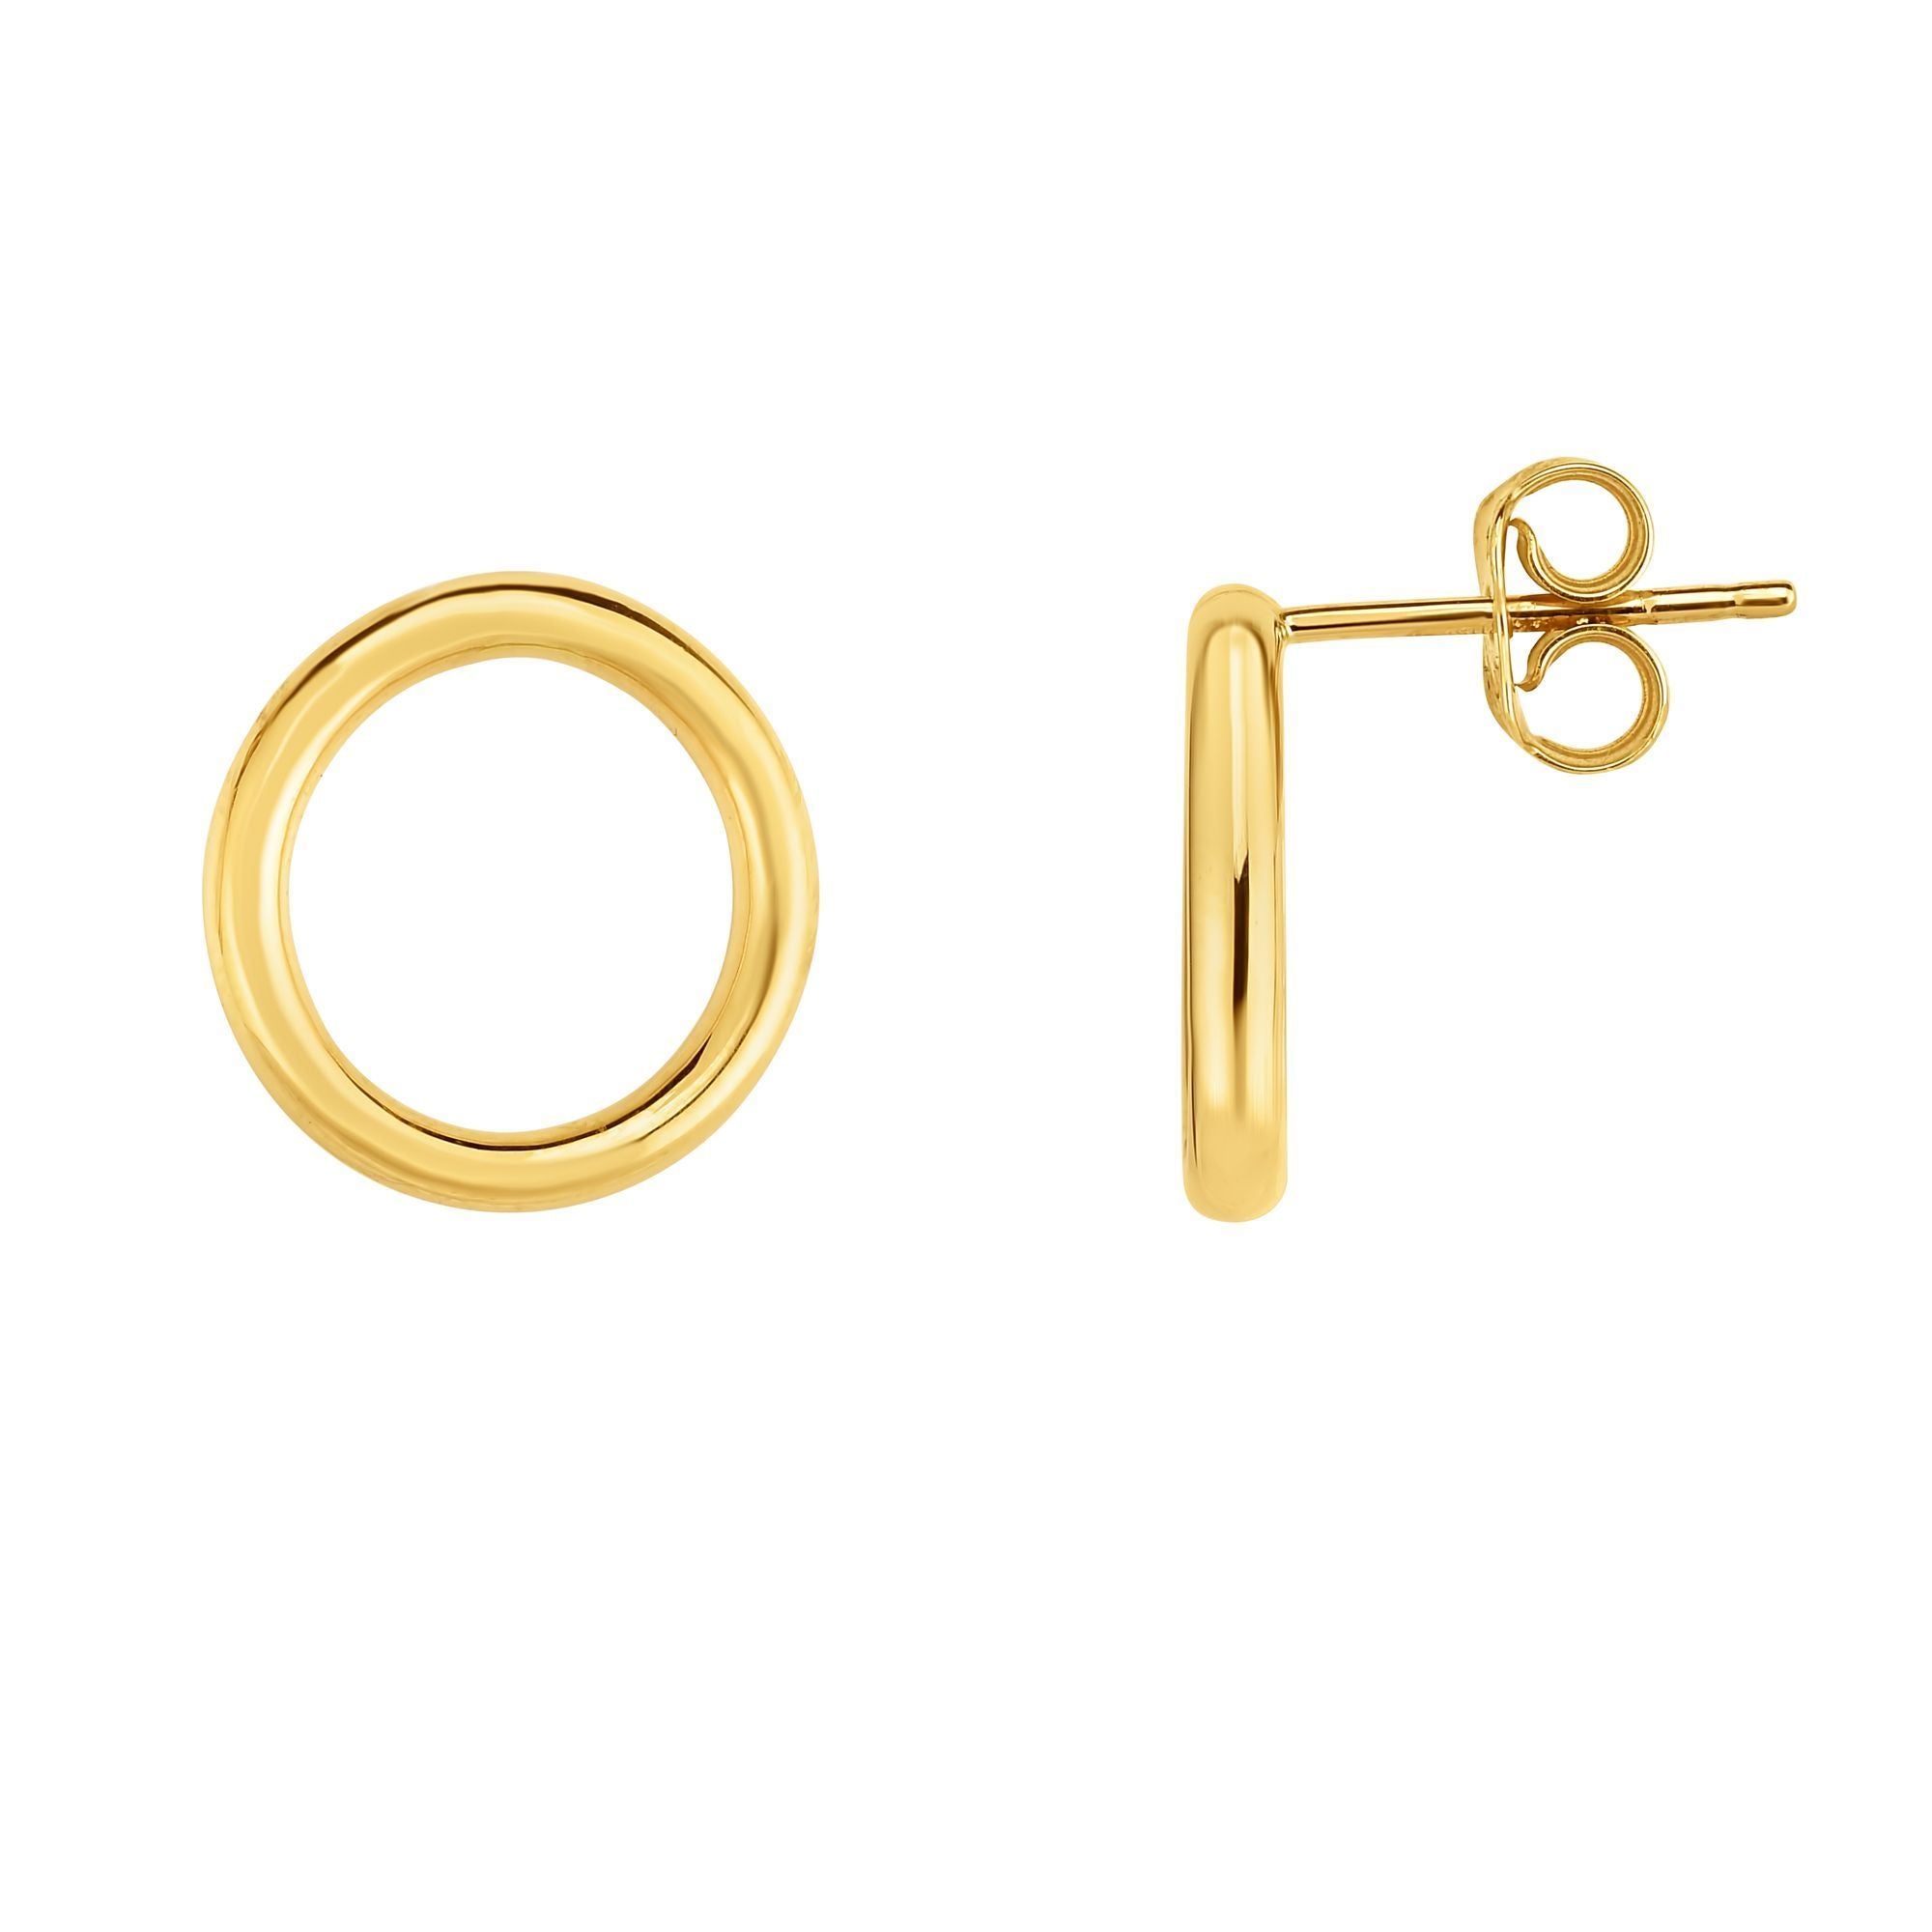 Minimalist Solid Gold Shiny Post Circle Earrings with Push Back Clasp - wingroupjewelry